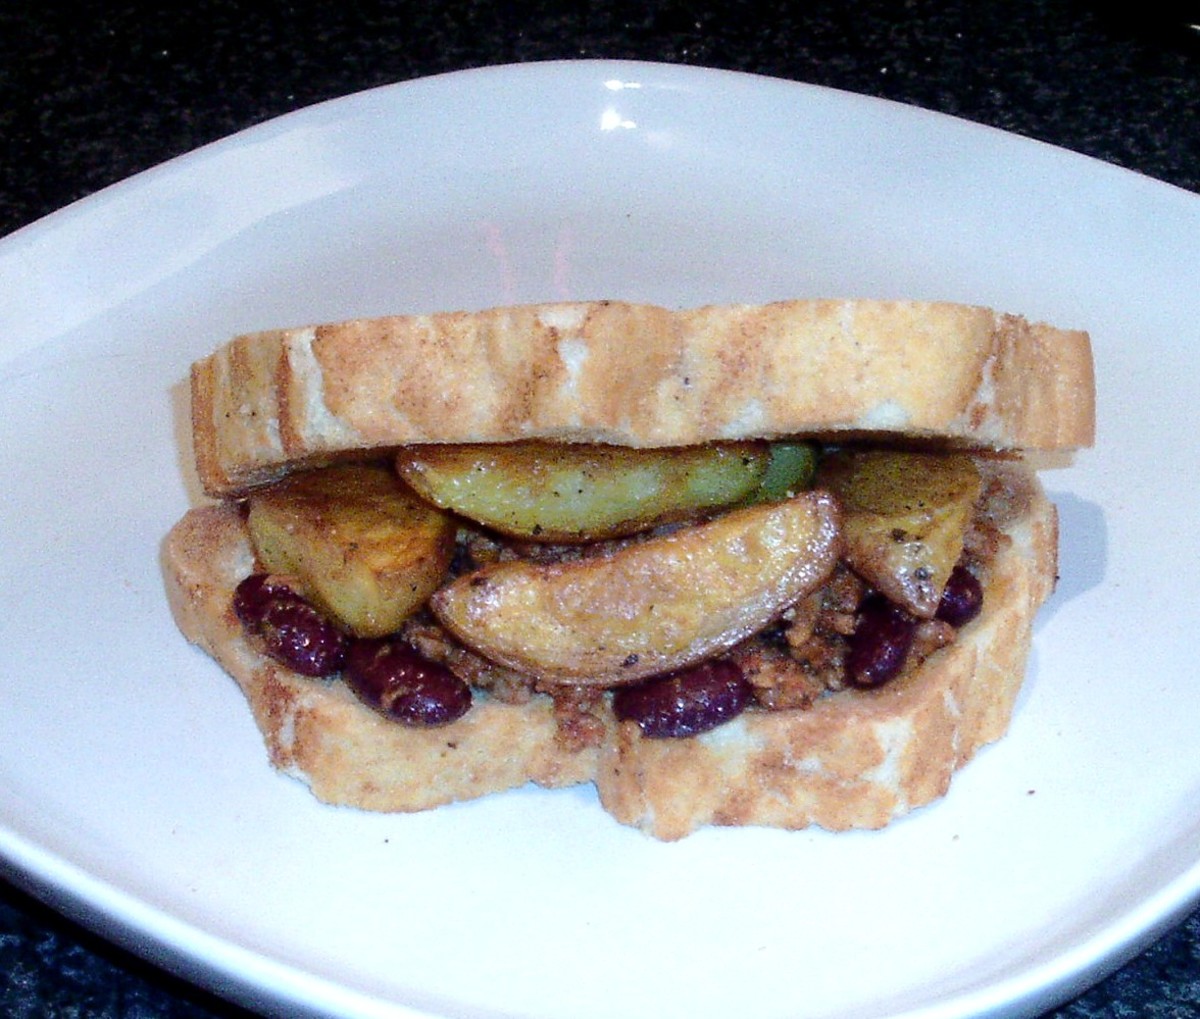 Lamb chilli and spicy oven chips butty